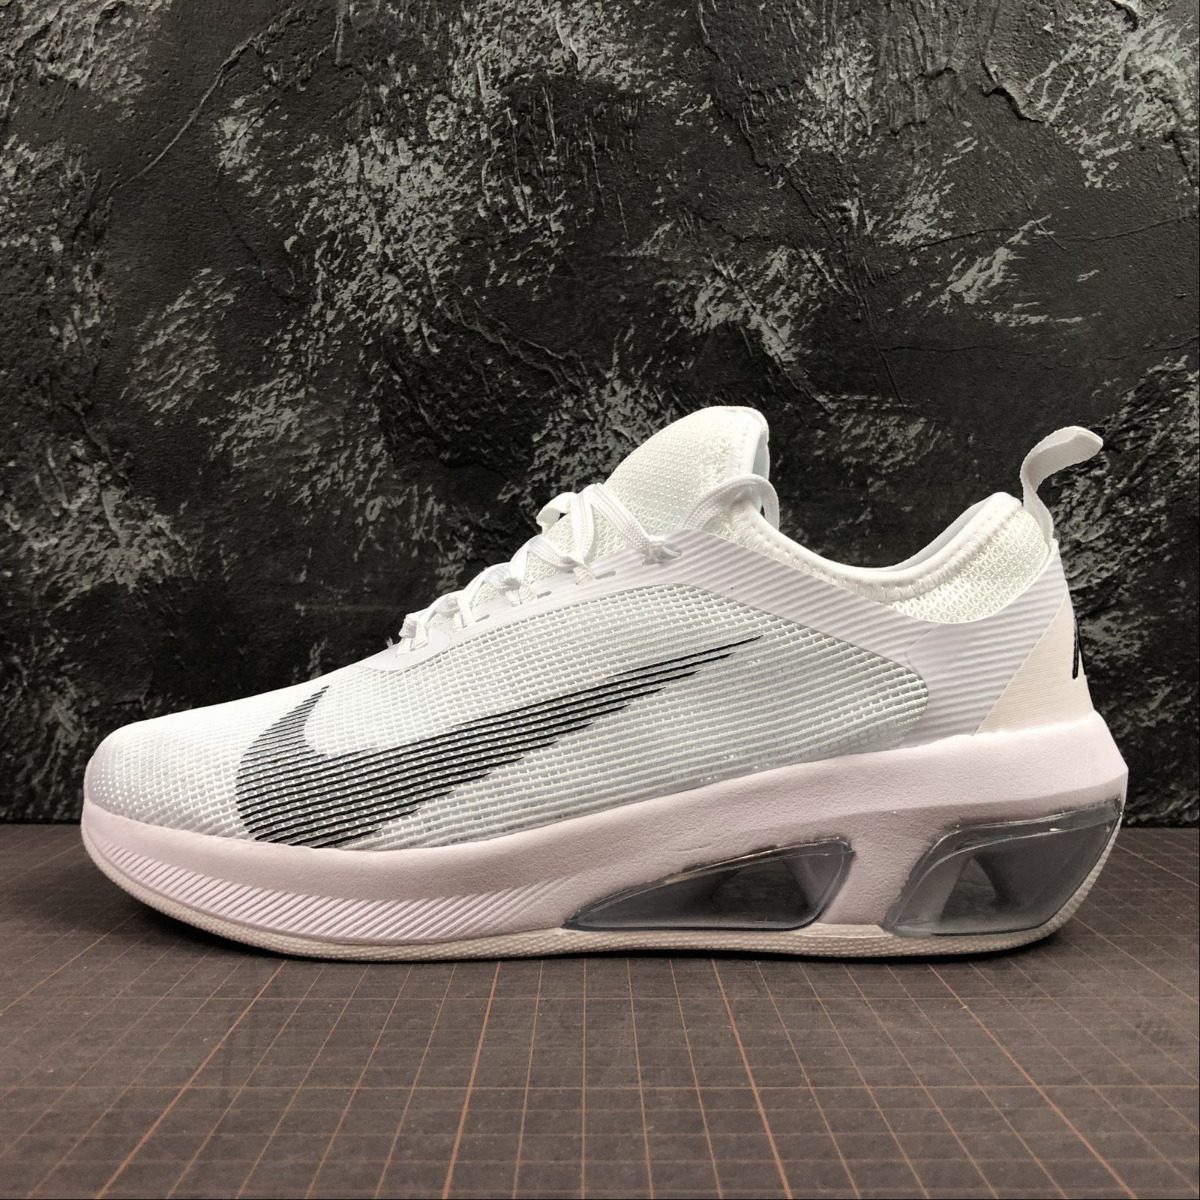 nike air max blanco 2019 factory outlet ac8e3 c322a